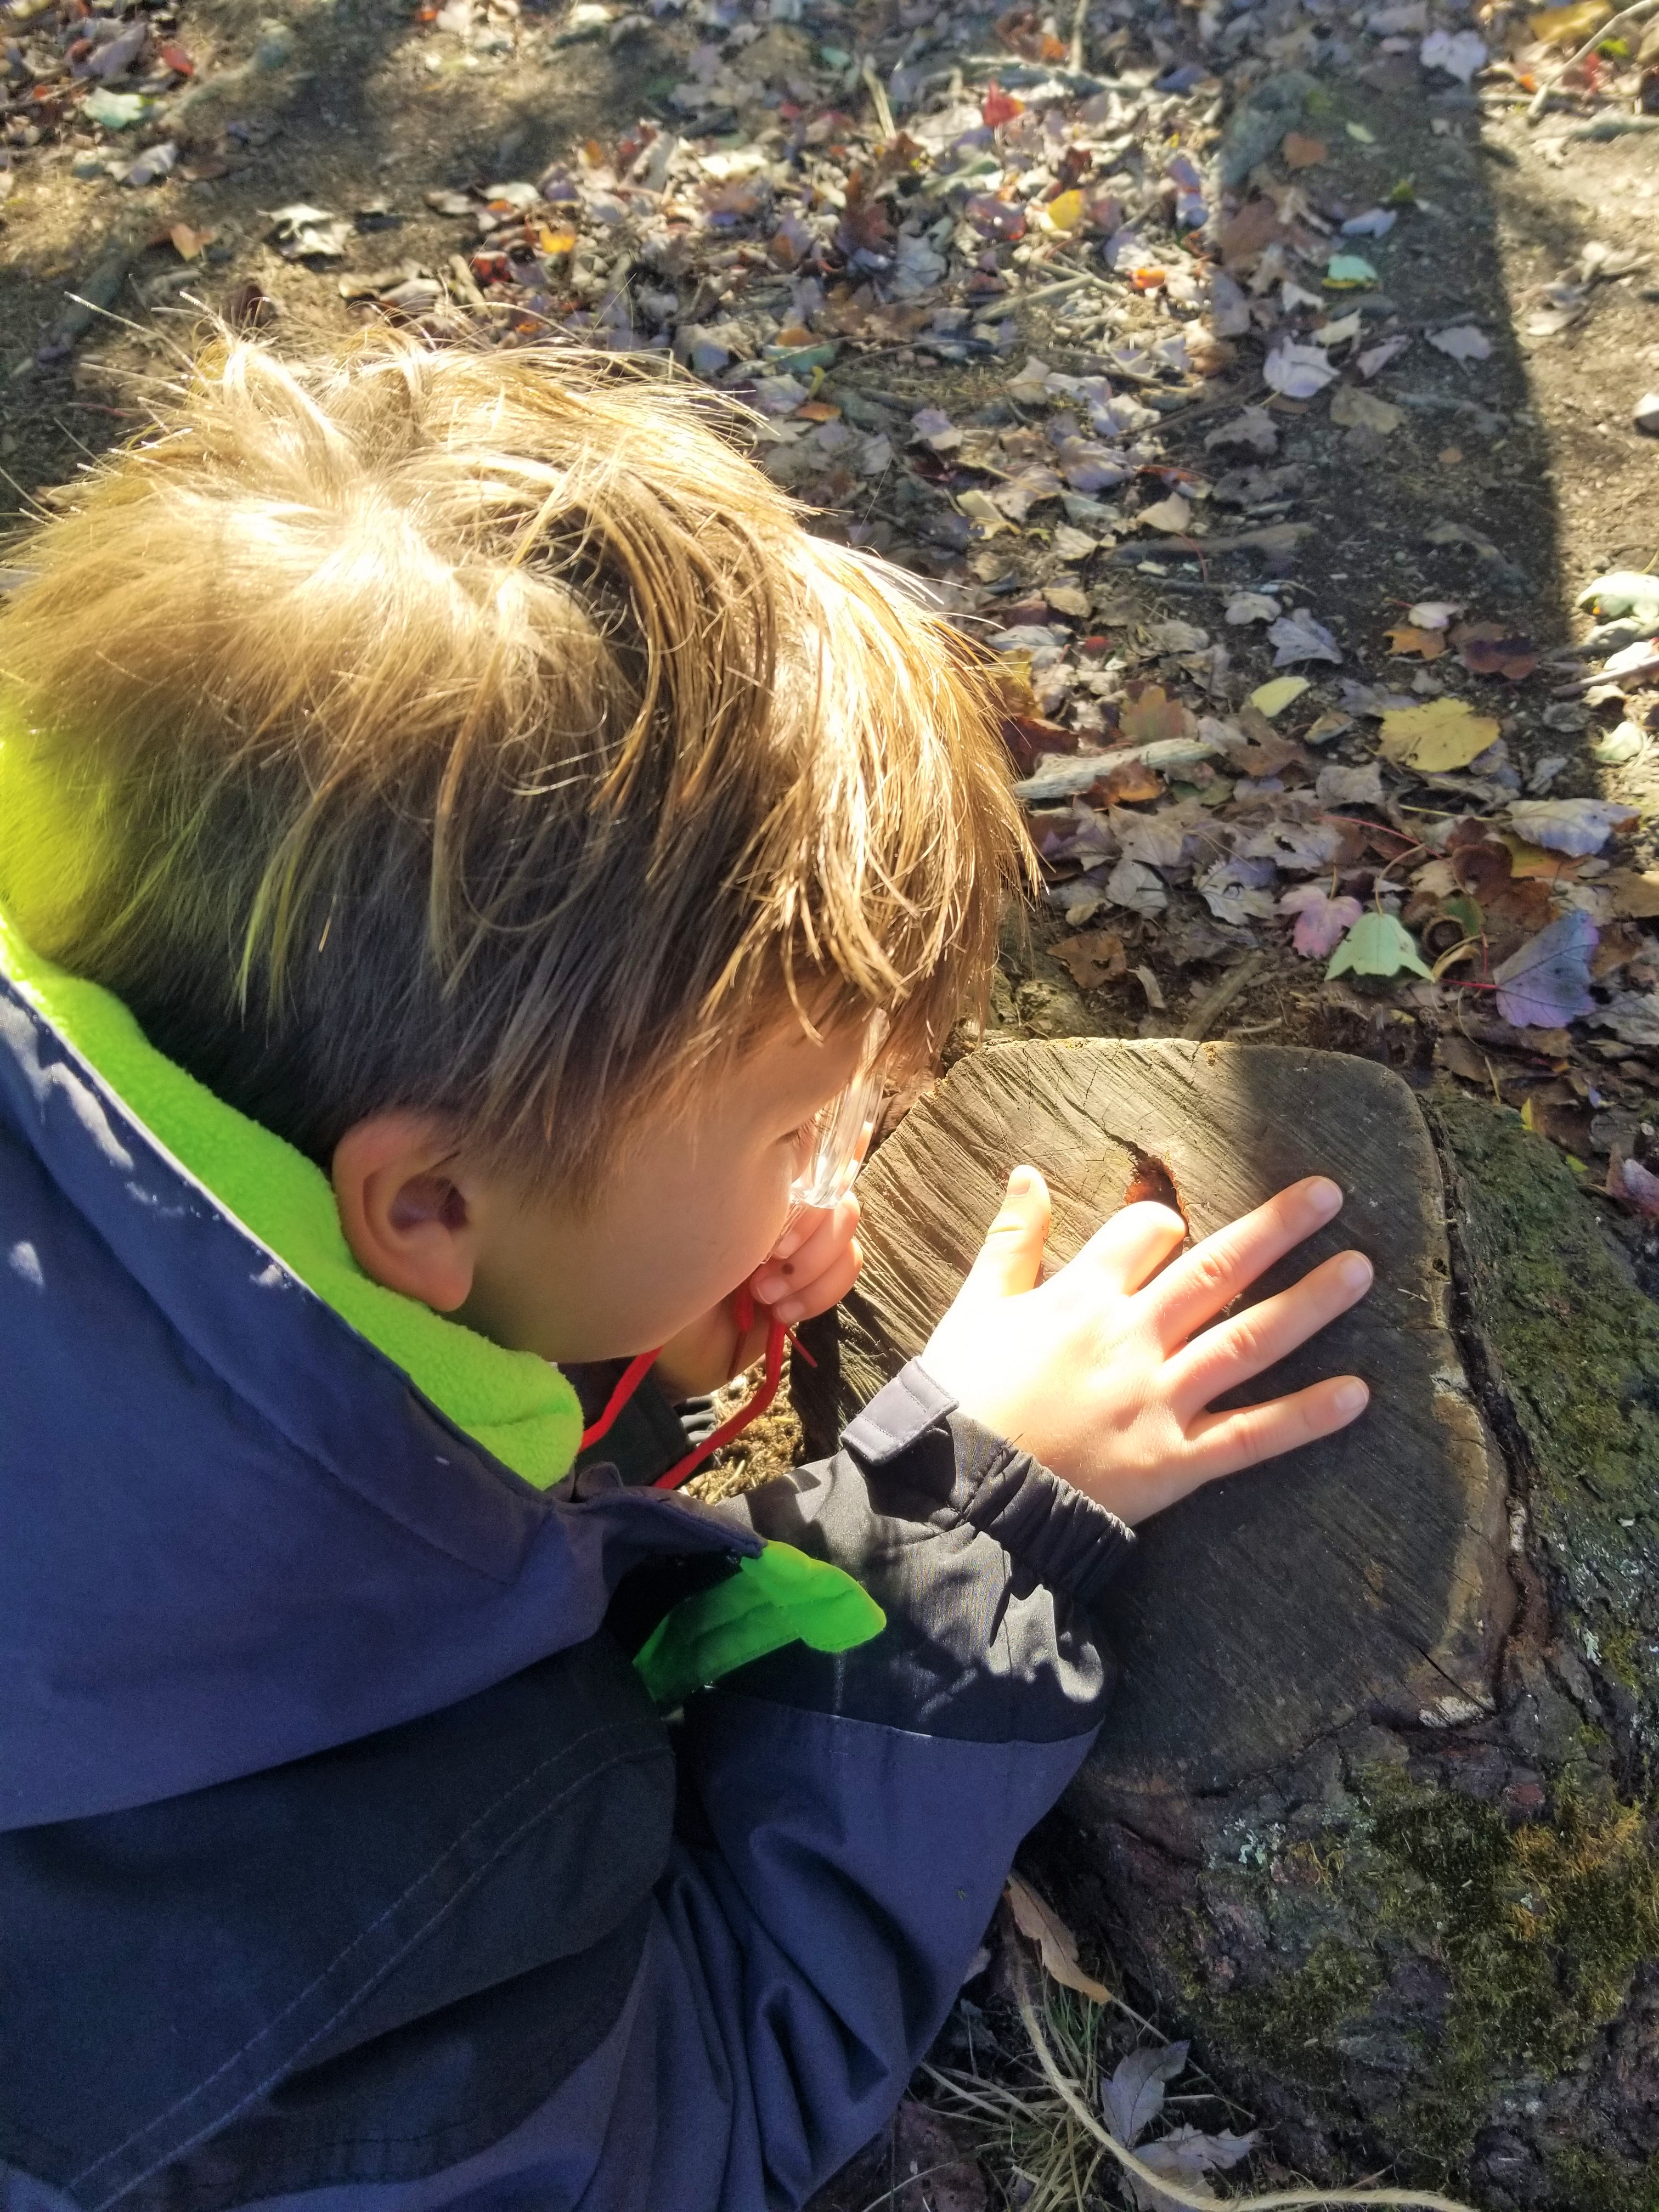 This student became fascinated with patterns within a tree stump